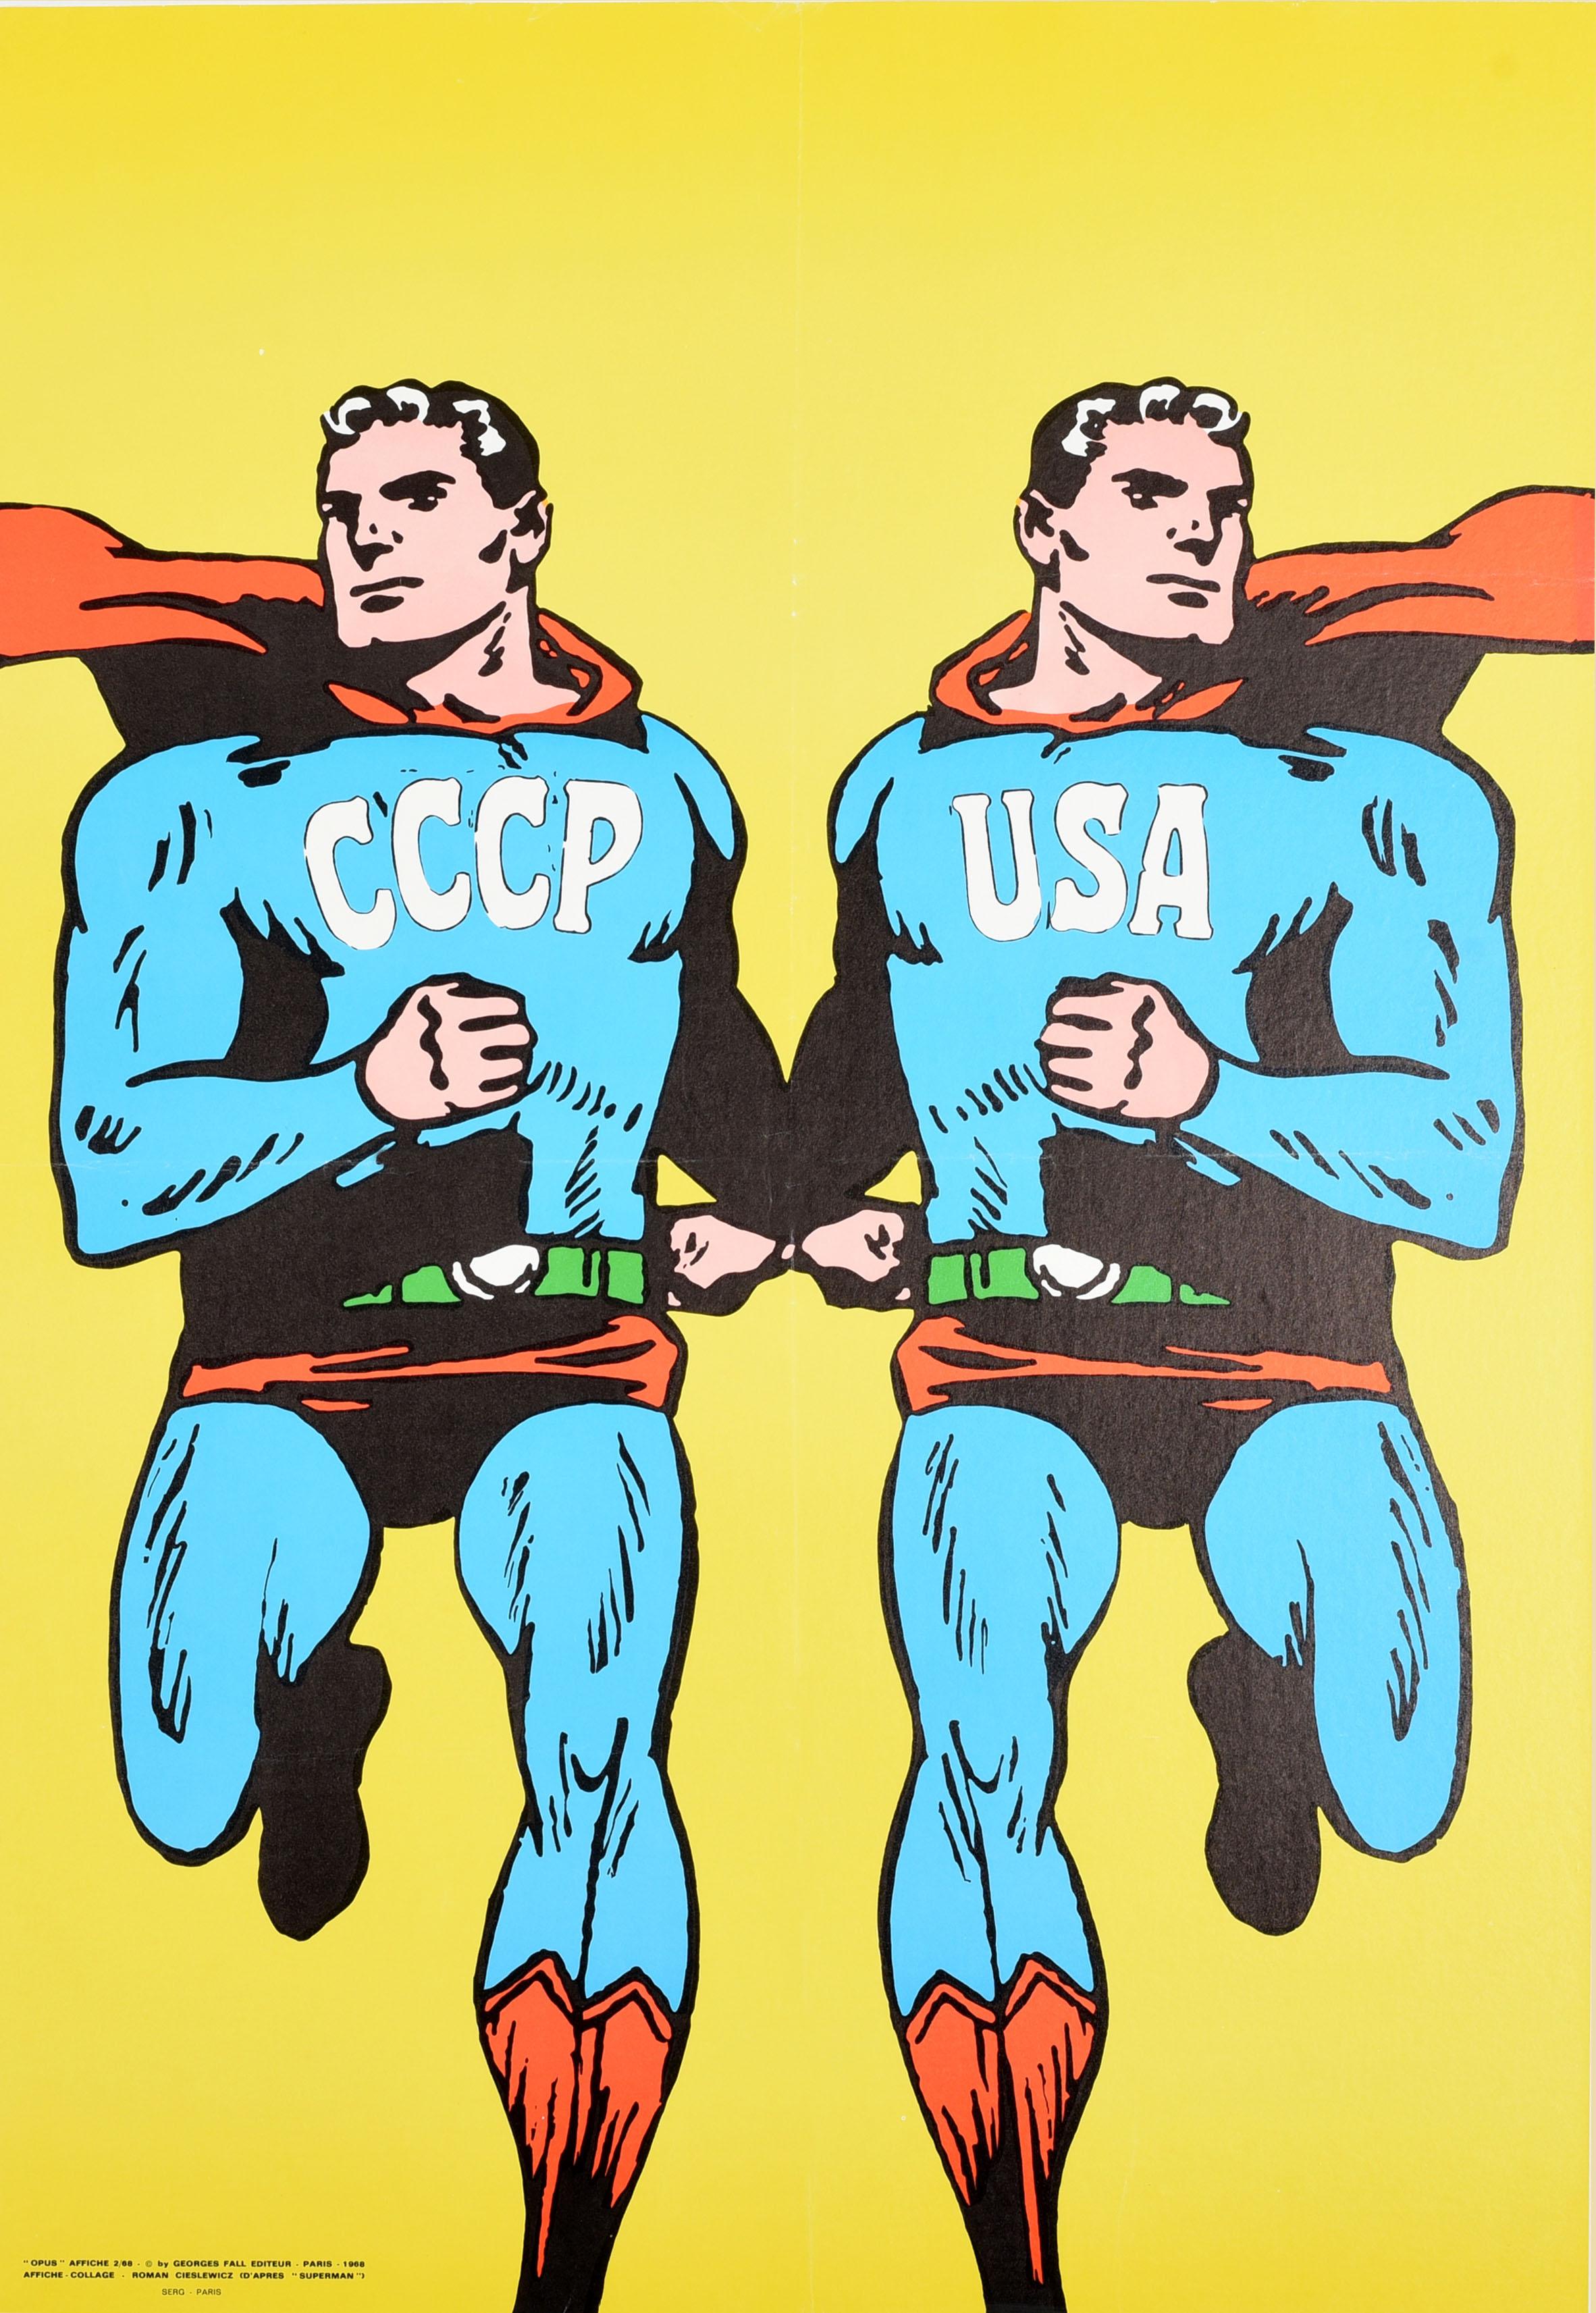 Original vintage Superman style poster - CCCP USA - by the renowned graphic designer Roman Cieslewicz (1930-1996) featuring a colourful Pop Art image of mirror versions of the comic book superhero Superman as the Cold War rivals USSR / CCCP / Soviet